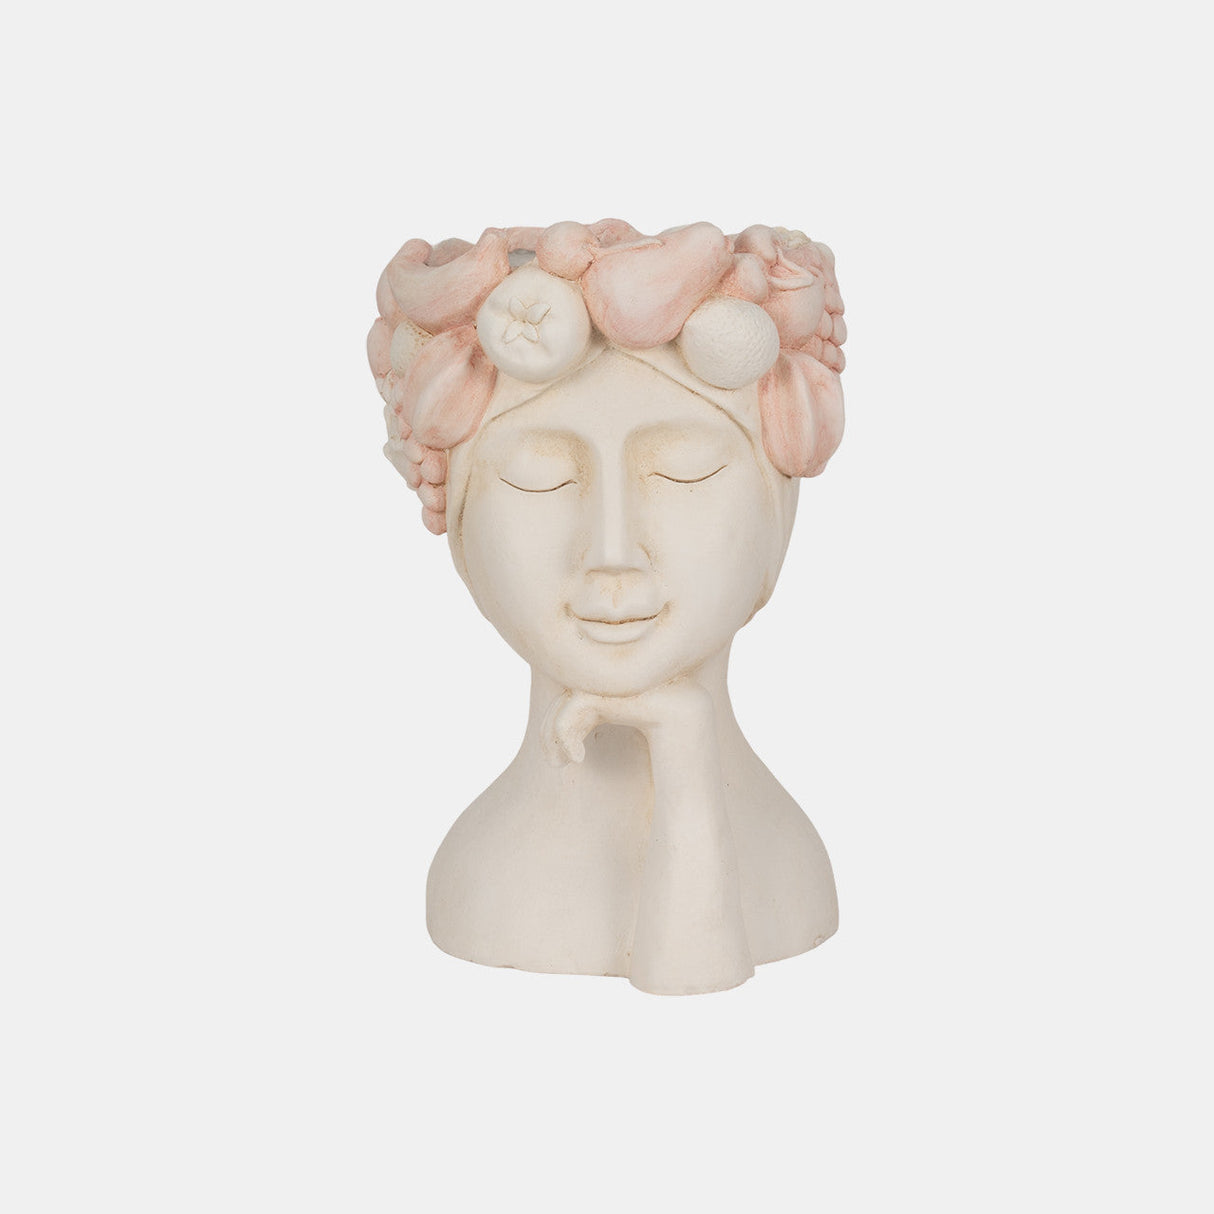 18" Lady With Flower Crown Planter, White/pink